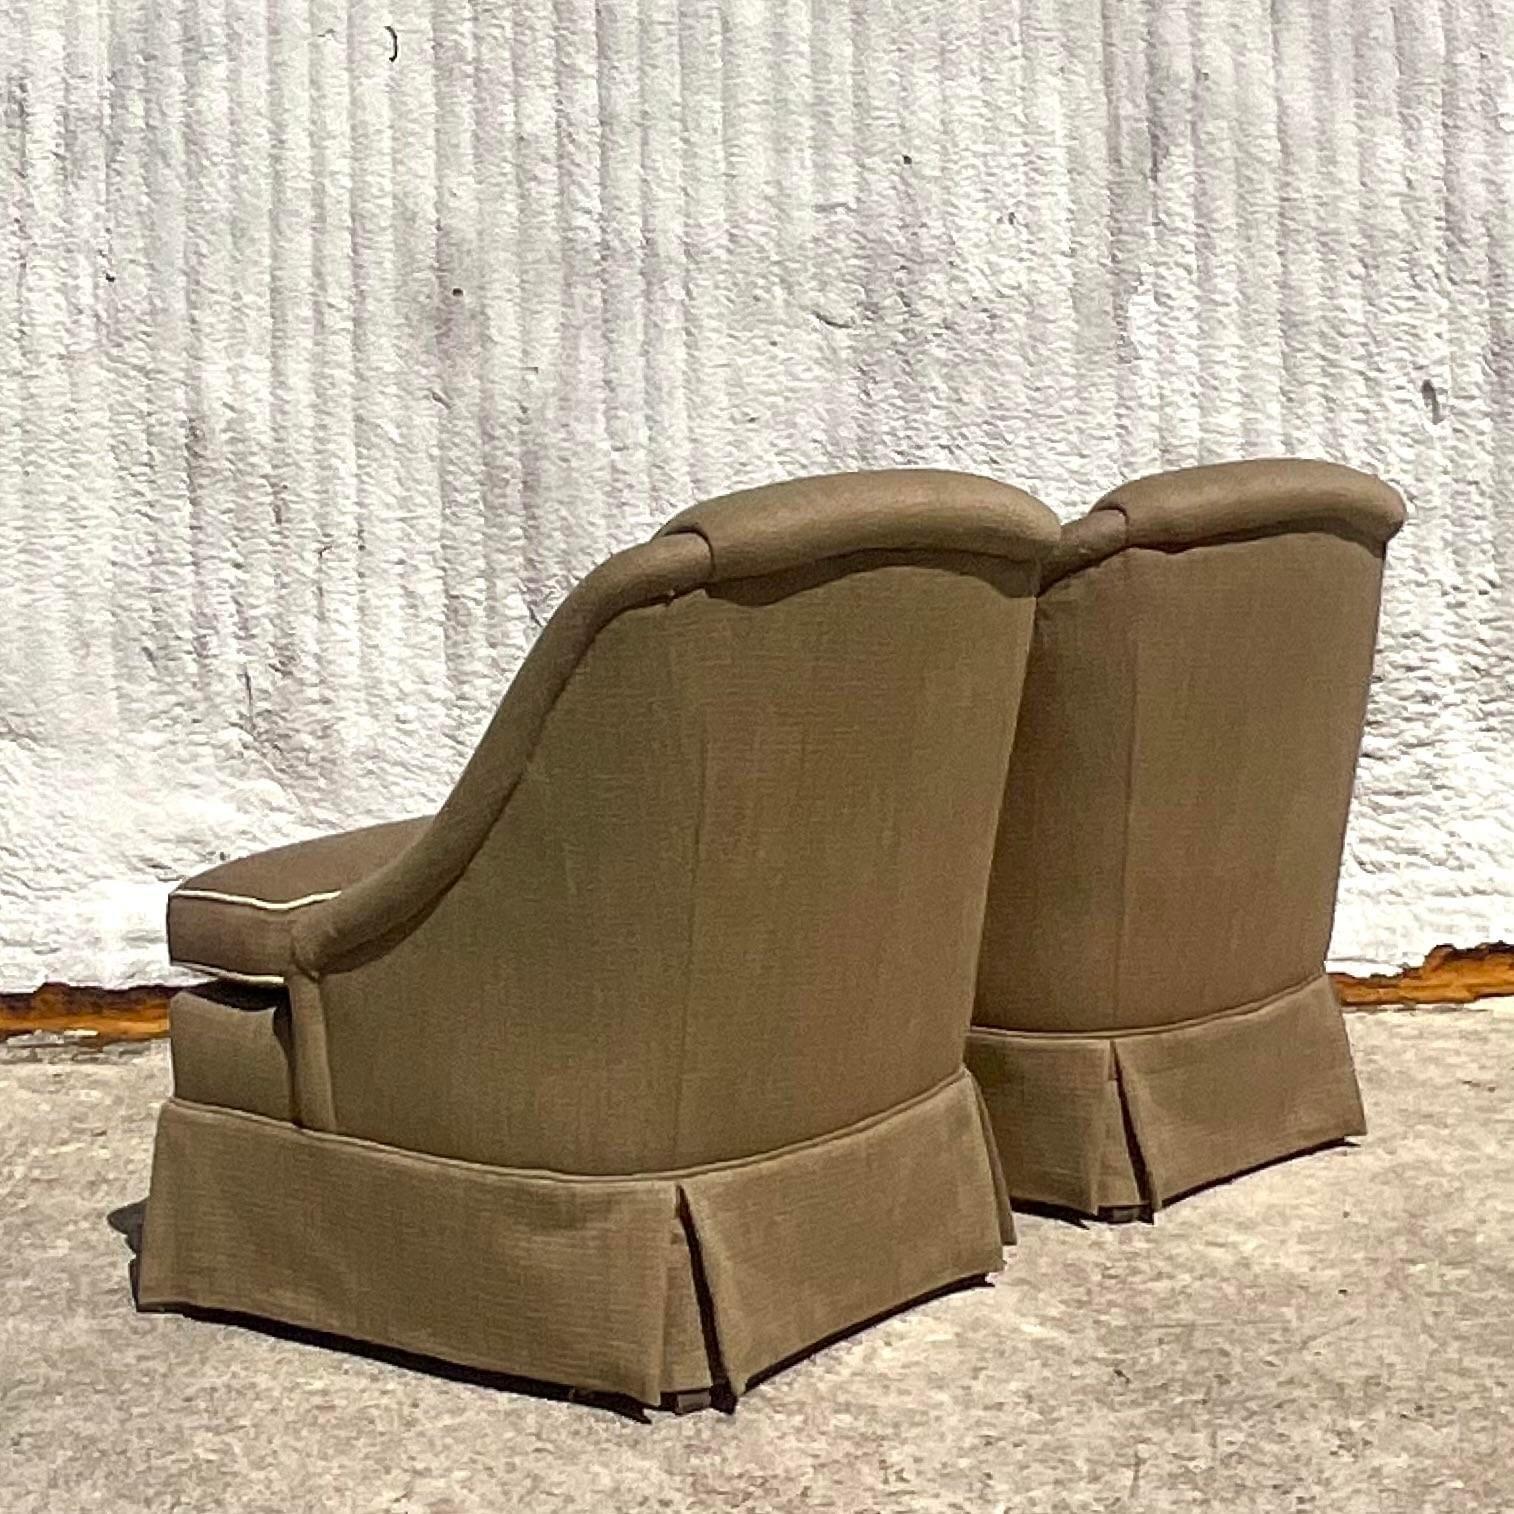 American Vintage Regency Tipped Lounge Chairs - a Pair